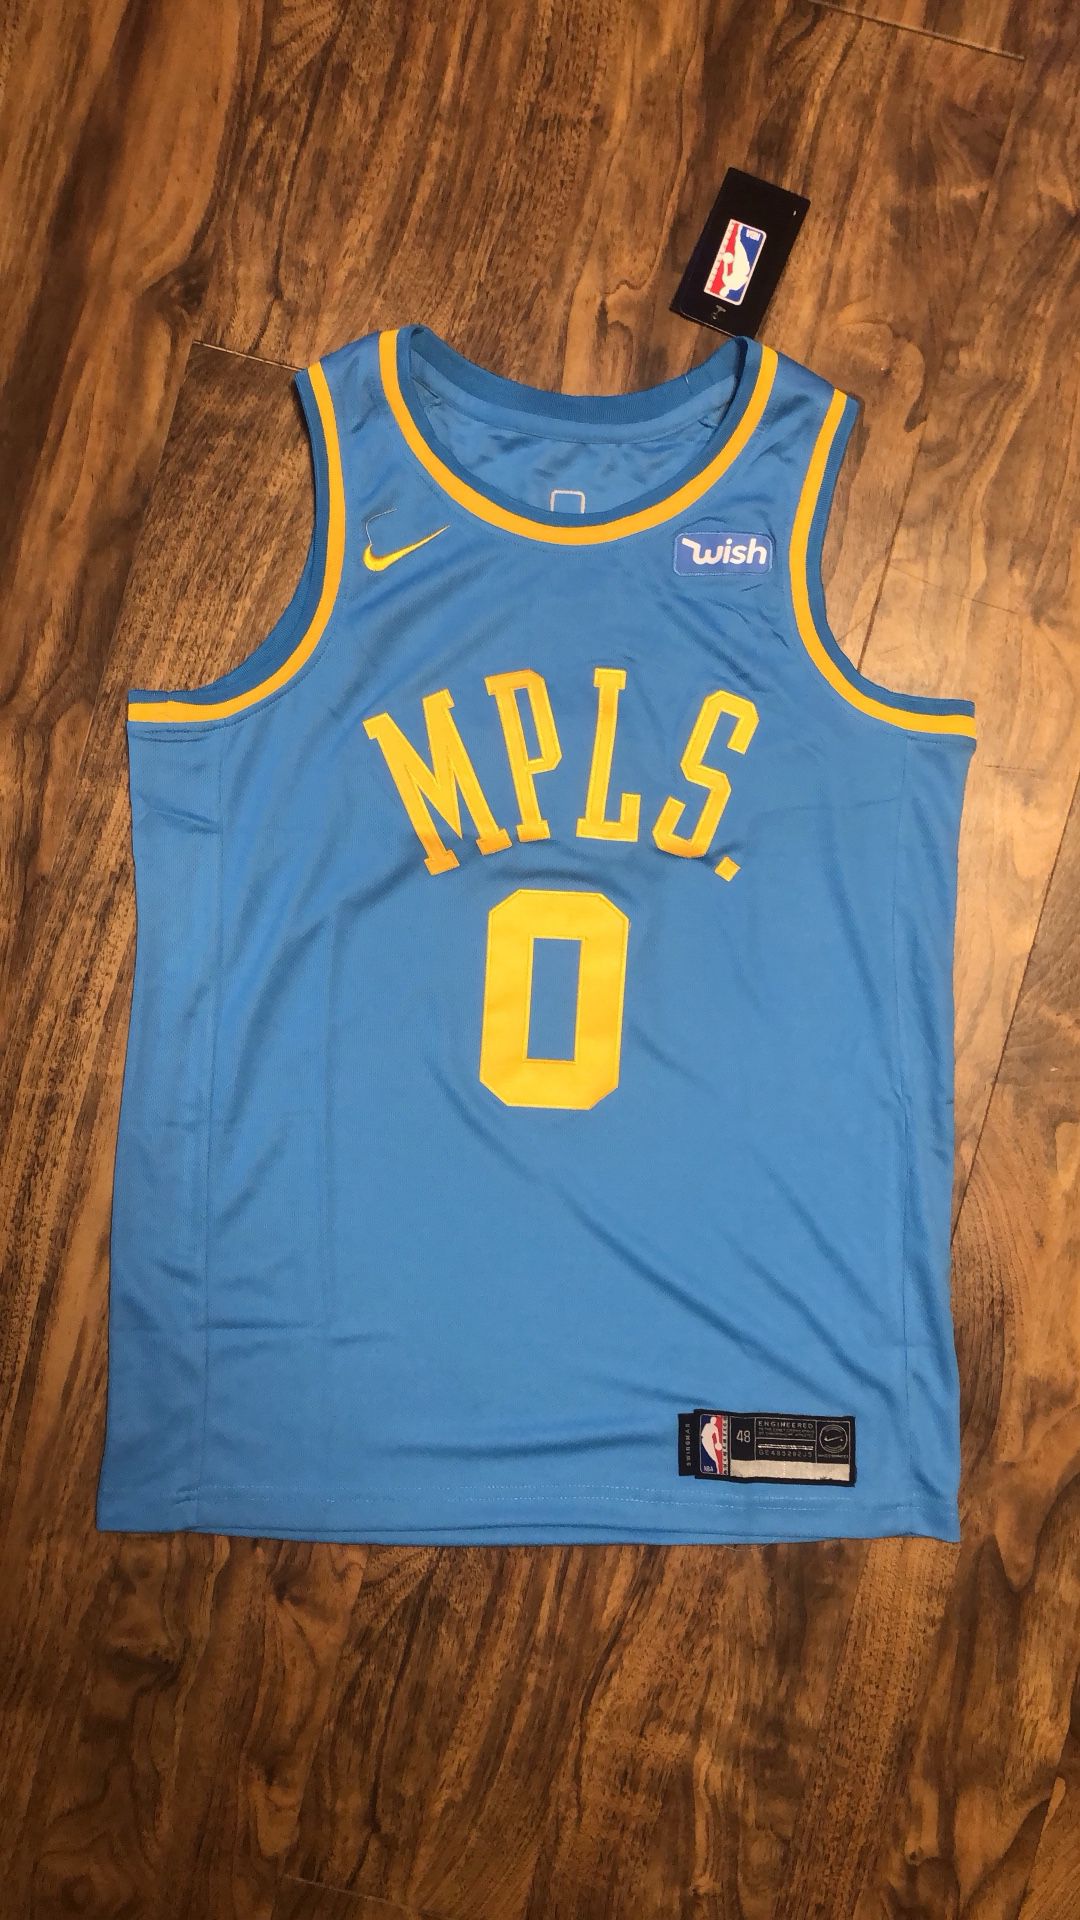 mpls jersey